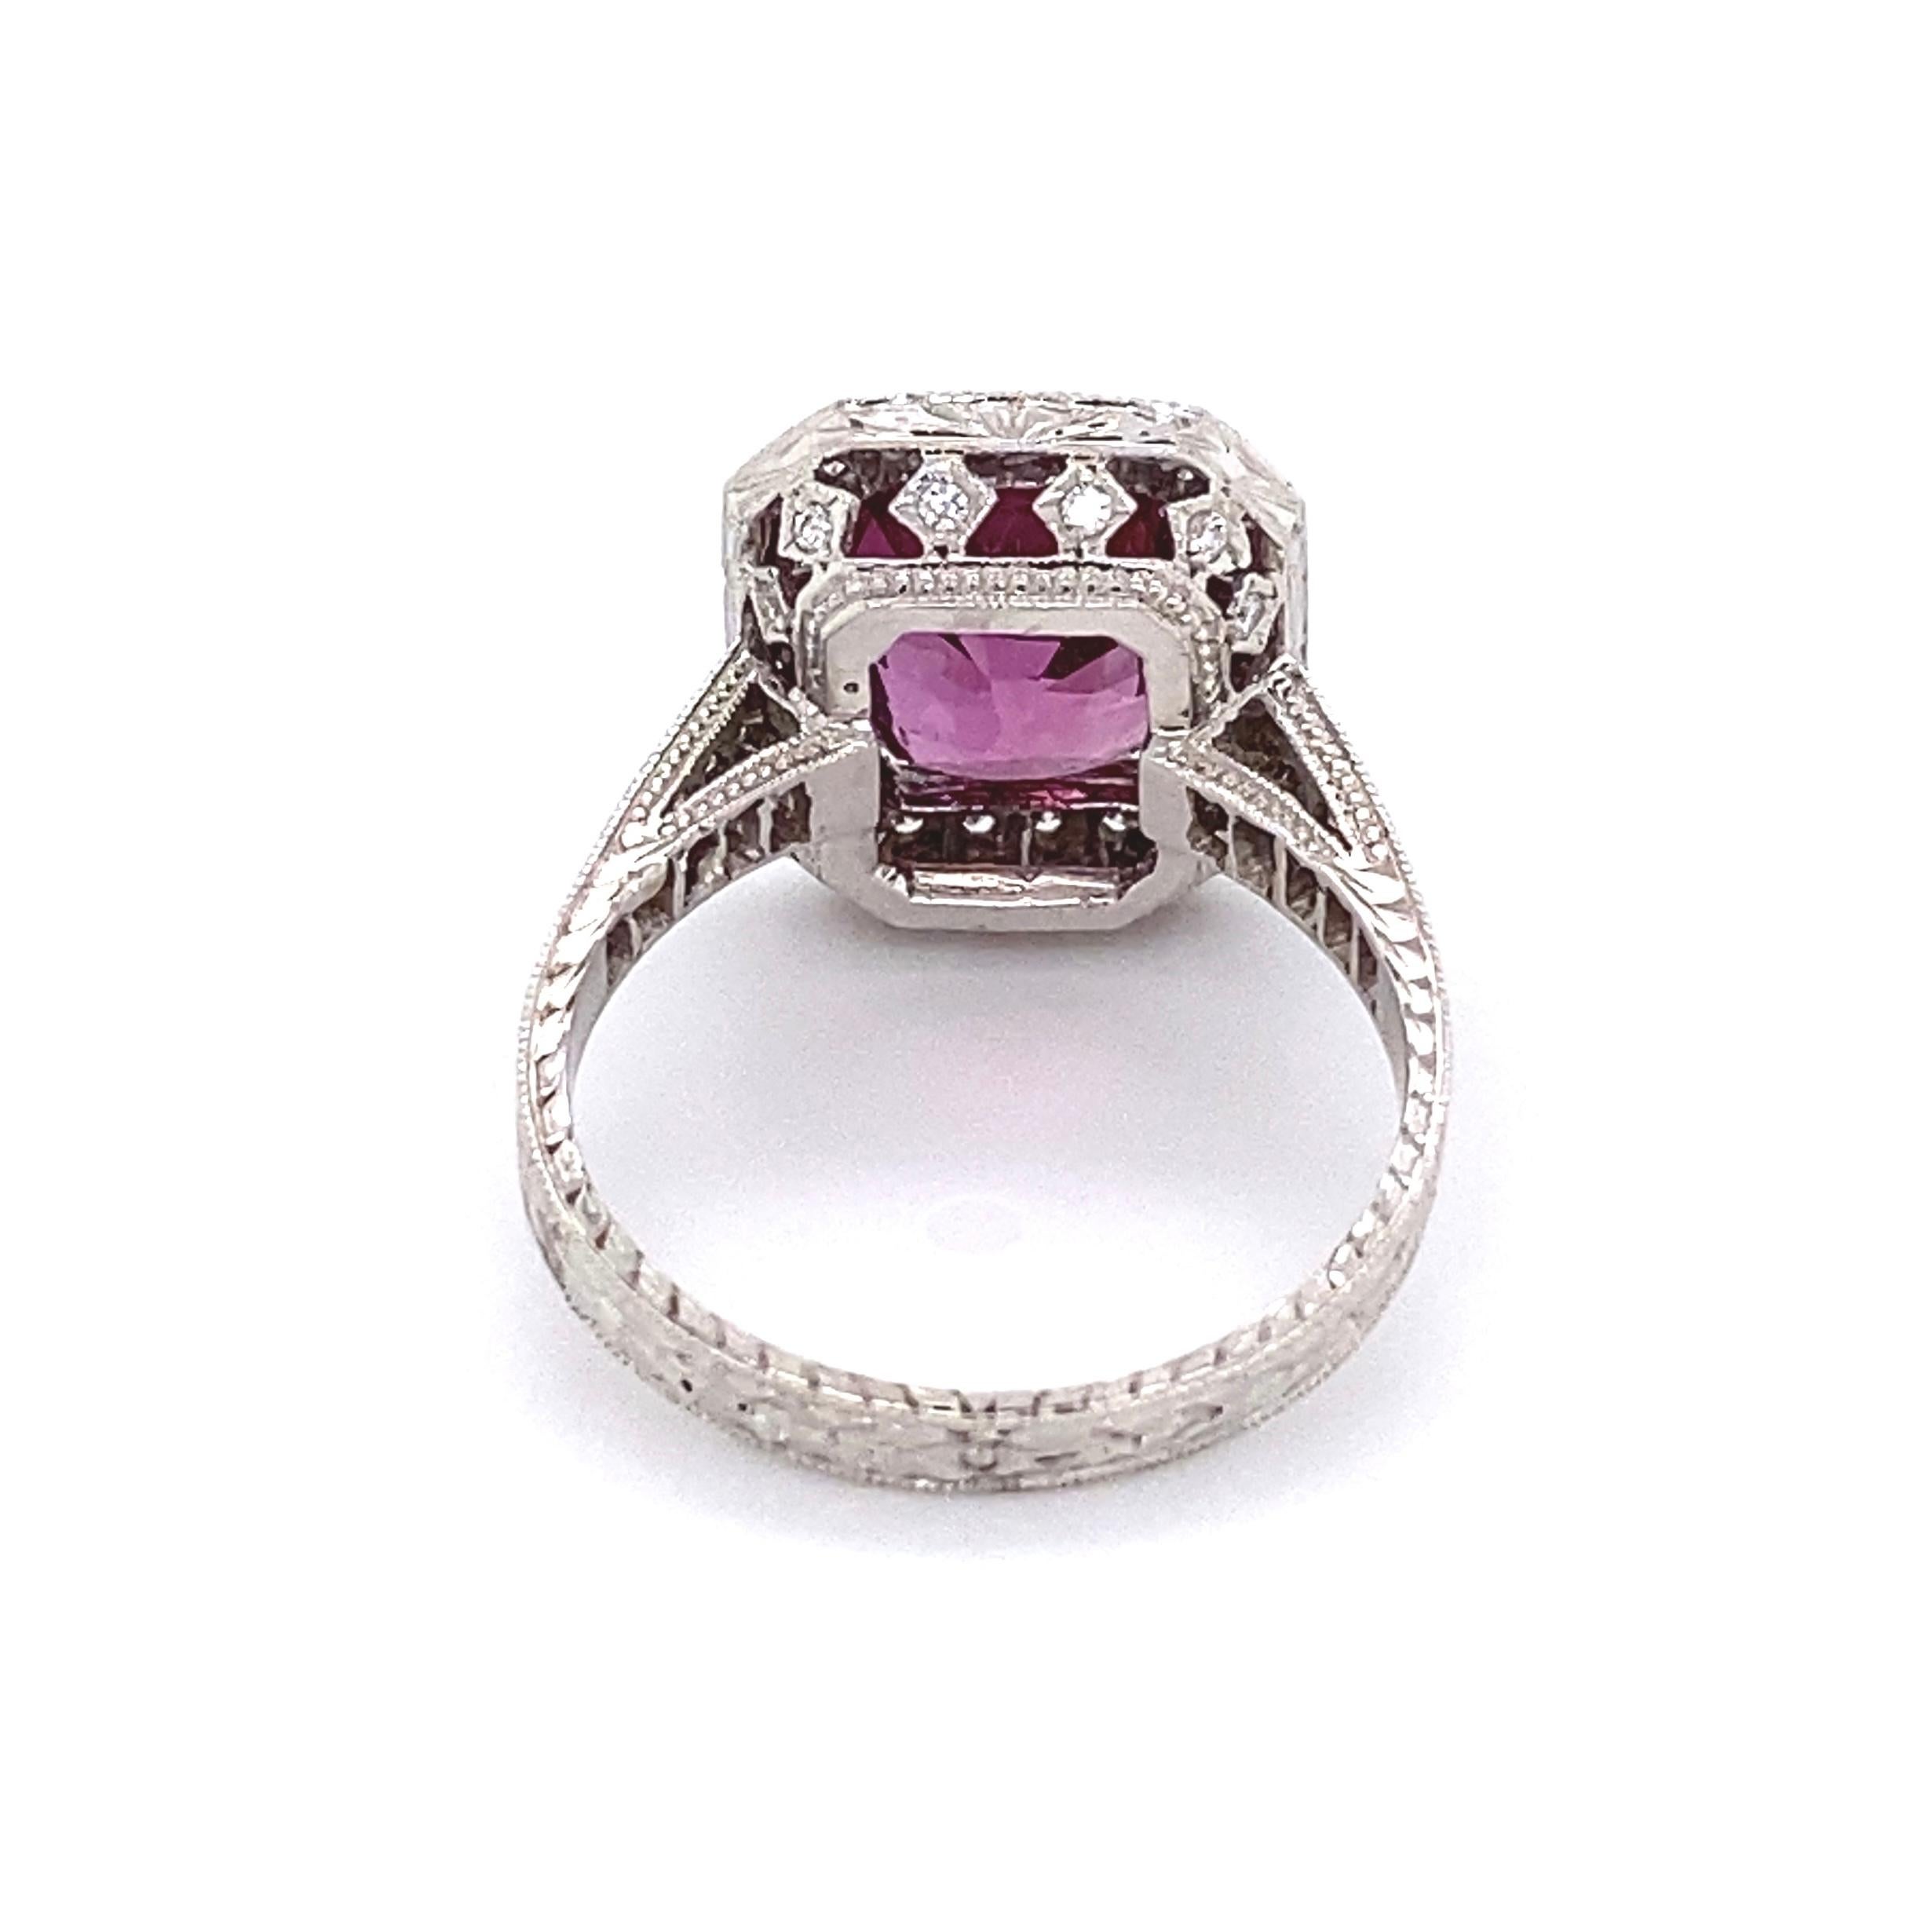 3.75 Carat Pink Cushion Sapphire and Diamond Gold Ring Estate Fine Jewelry  In Excellent Condition For Sale In Montreal, QC